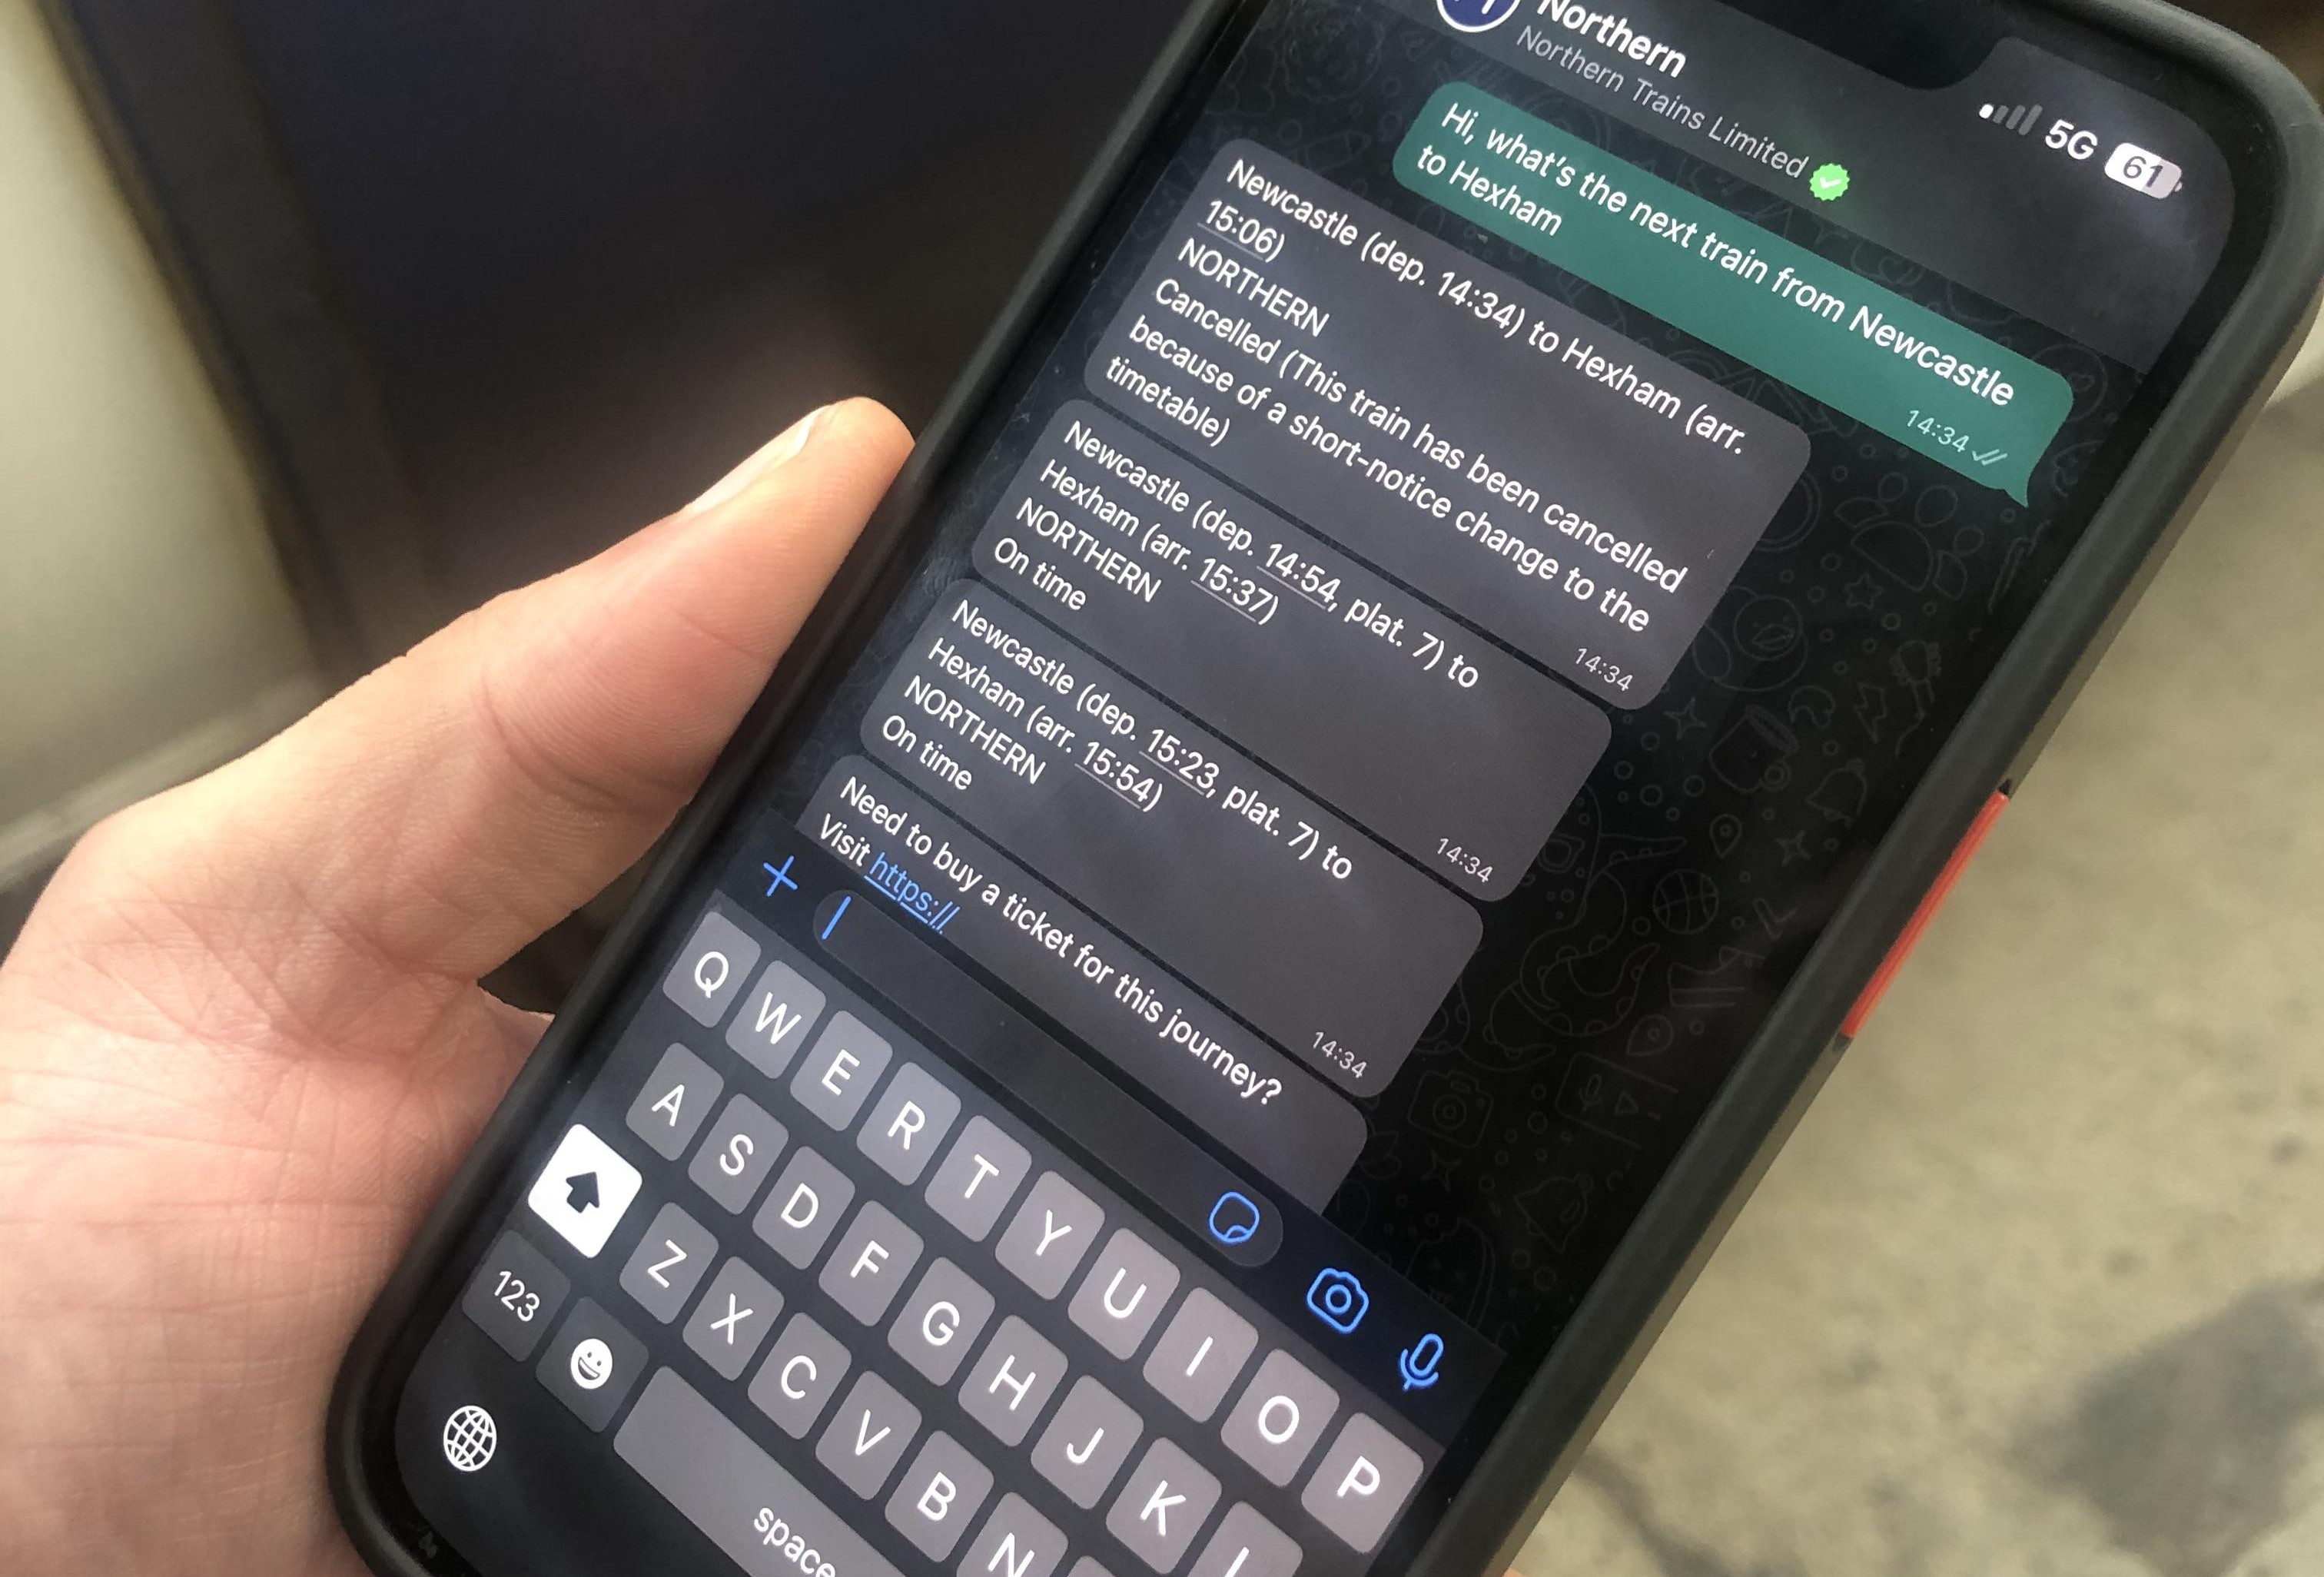 this-image-shows-the-new-whatsapp-service-being-used-on-a-phone-next-to-a-northern-train